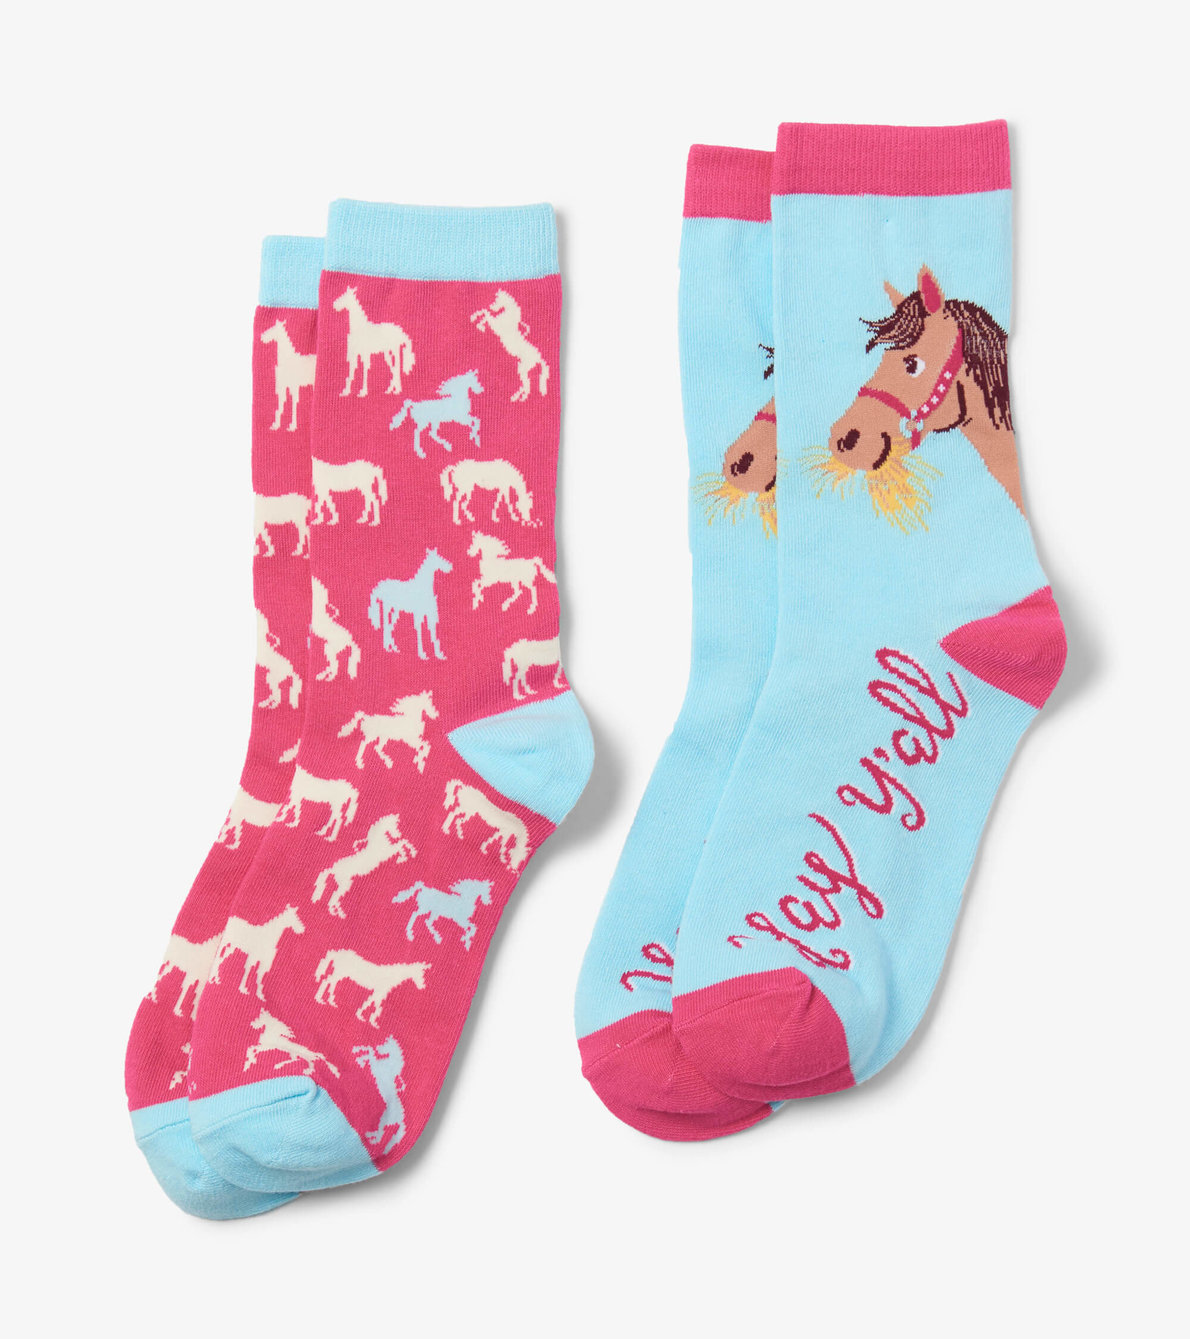 View larger image of Country Horses Women's Crew Sock Set